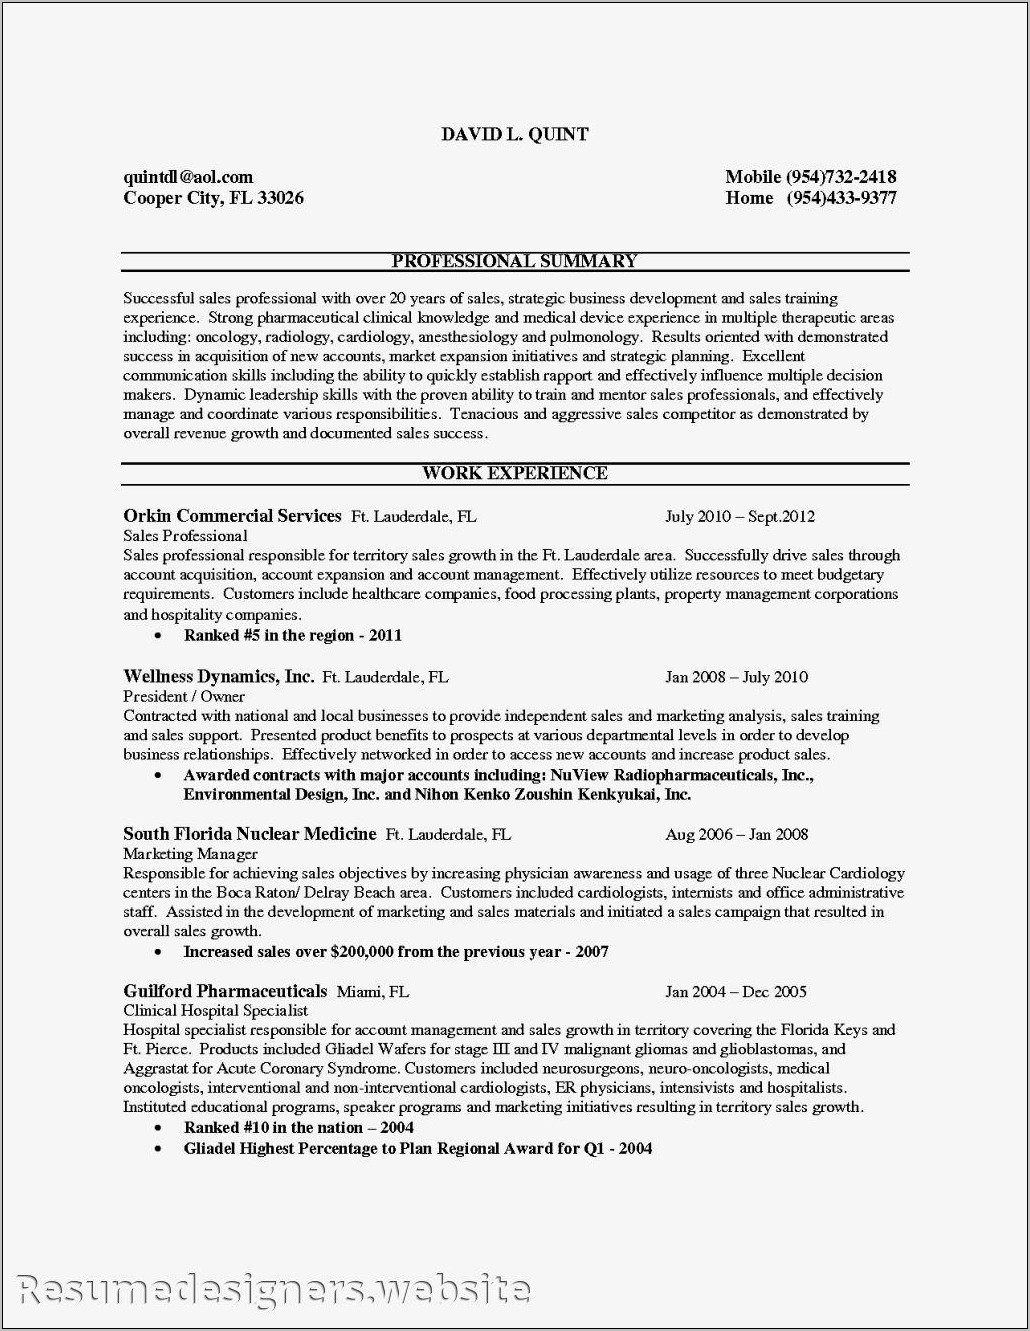 Resume Sugestions For Objective For Sales Rep